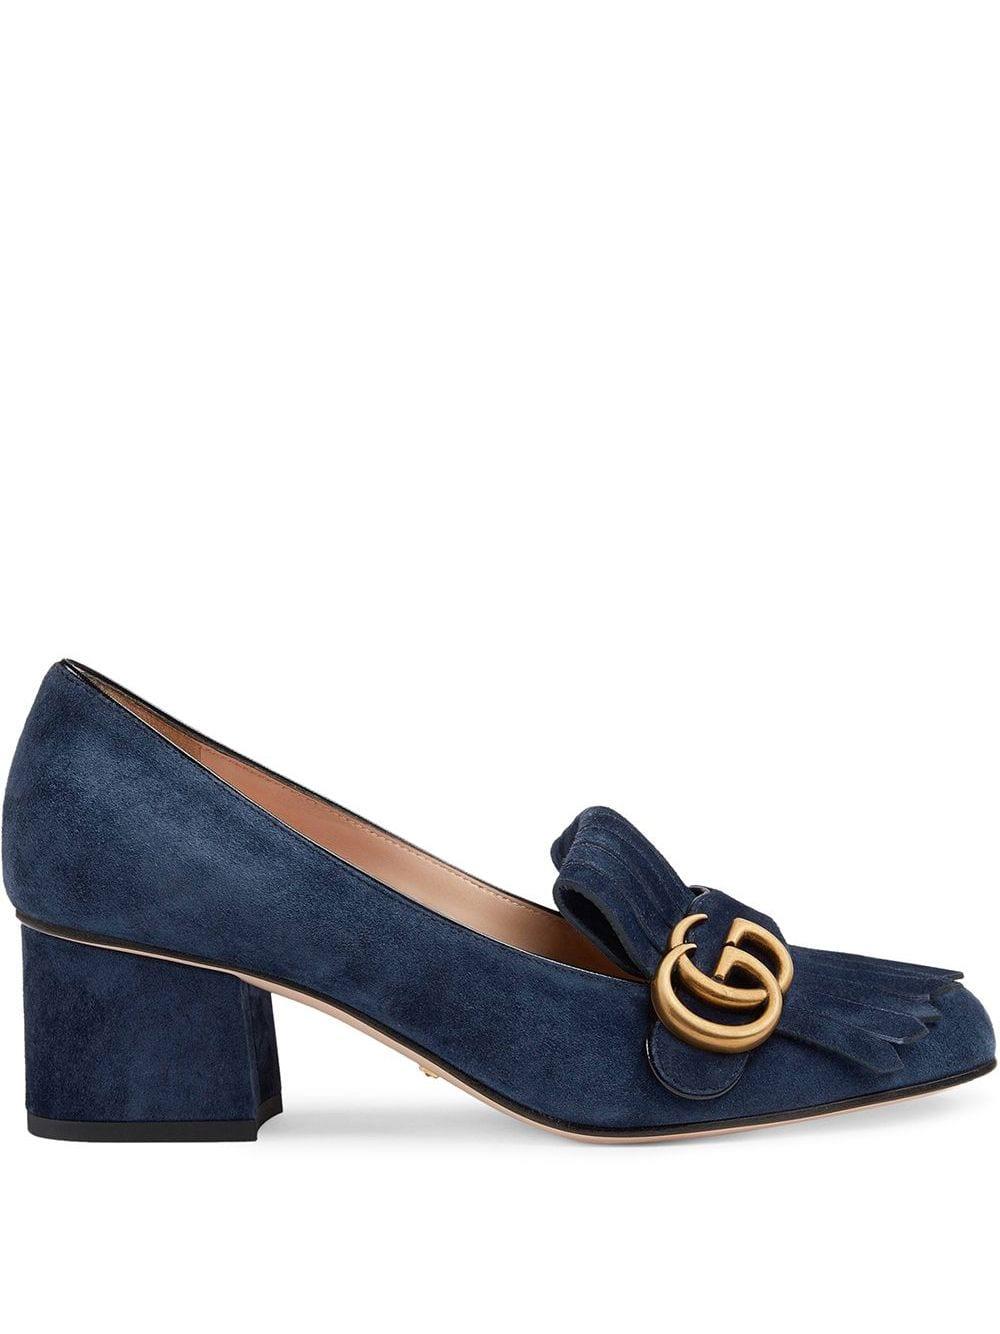 Gucci Suede Mid-heel Pump With Double G in Blue - Lyst